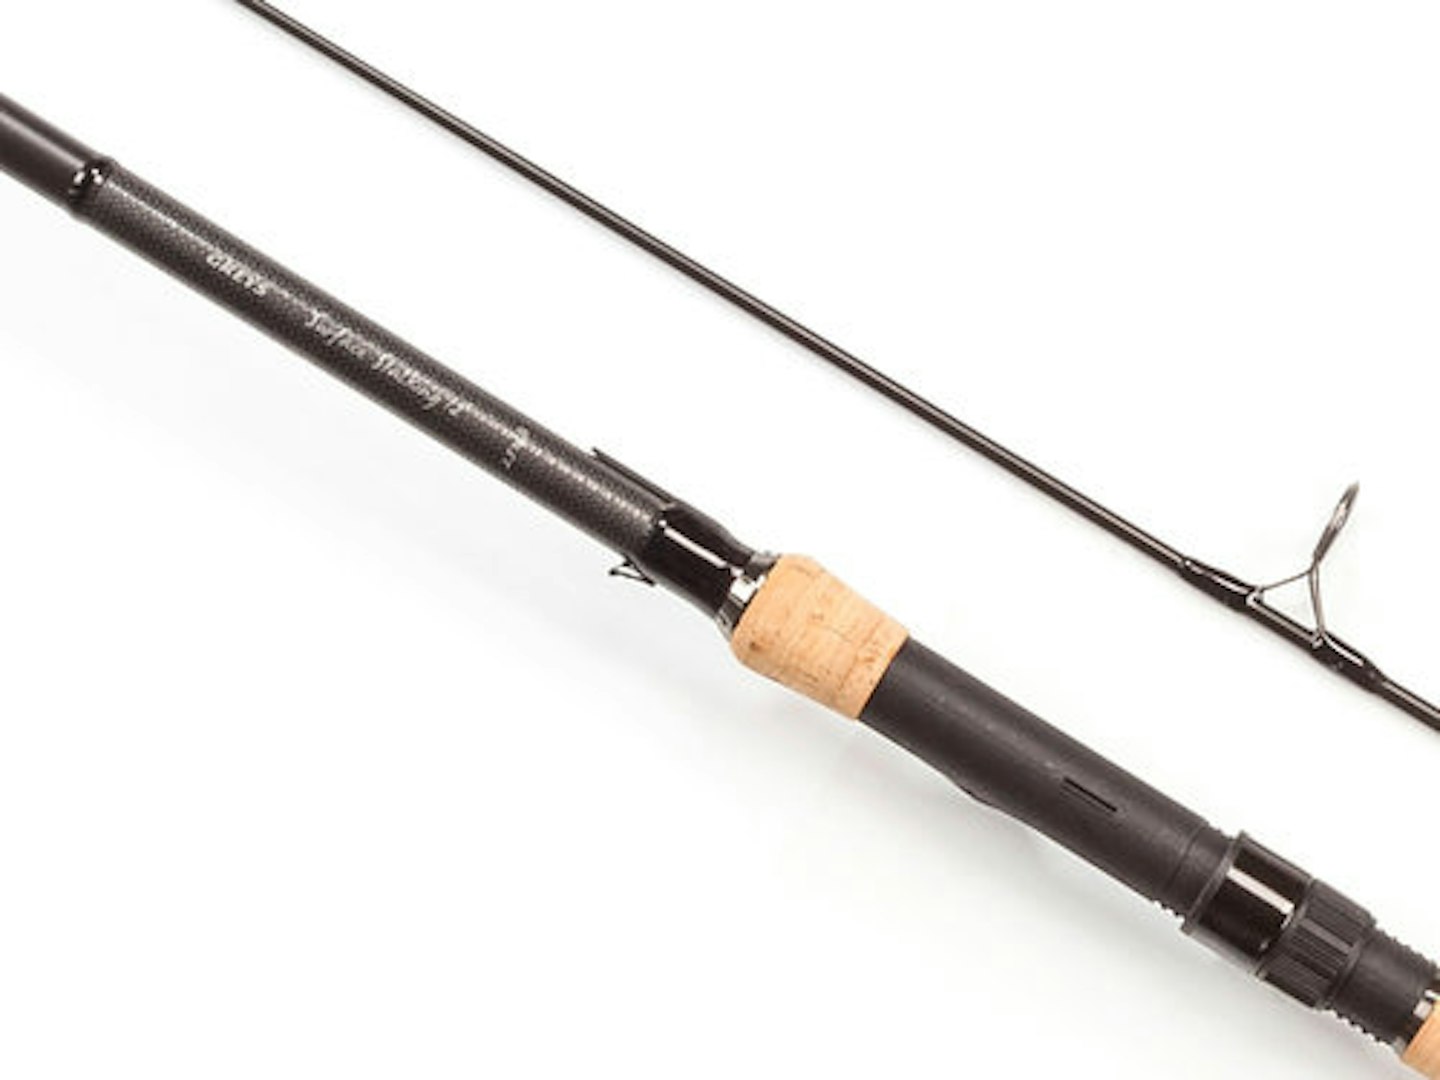 BUYER'S GUIDE TO THE BEST FLOATER FISHING RODS FOR CARP - Image Asset%20 %202021 03 04T114539.115